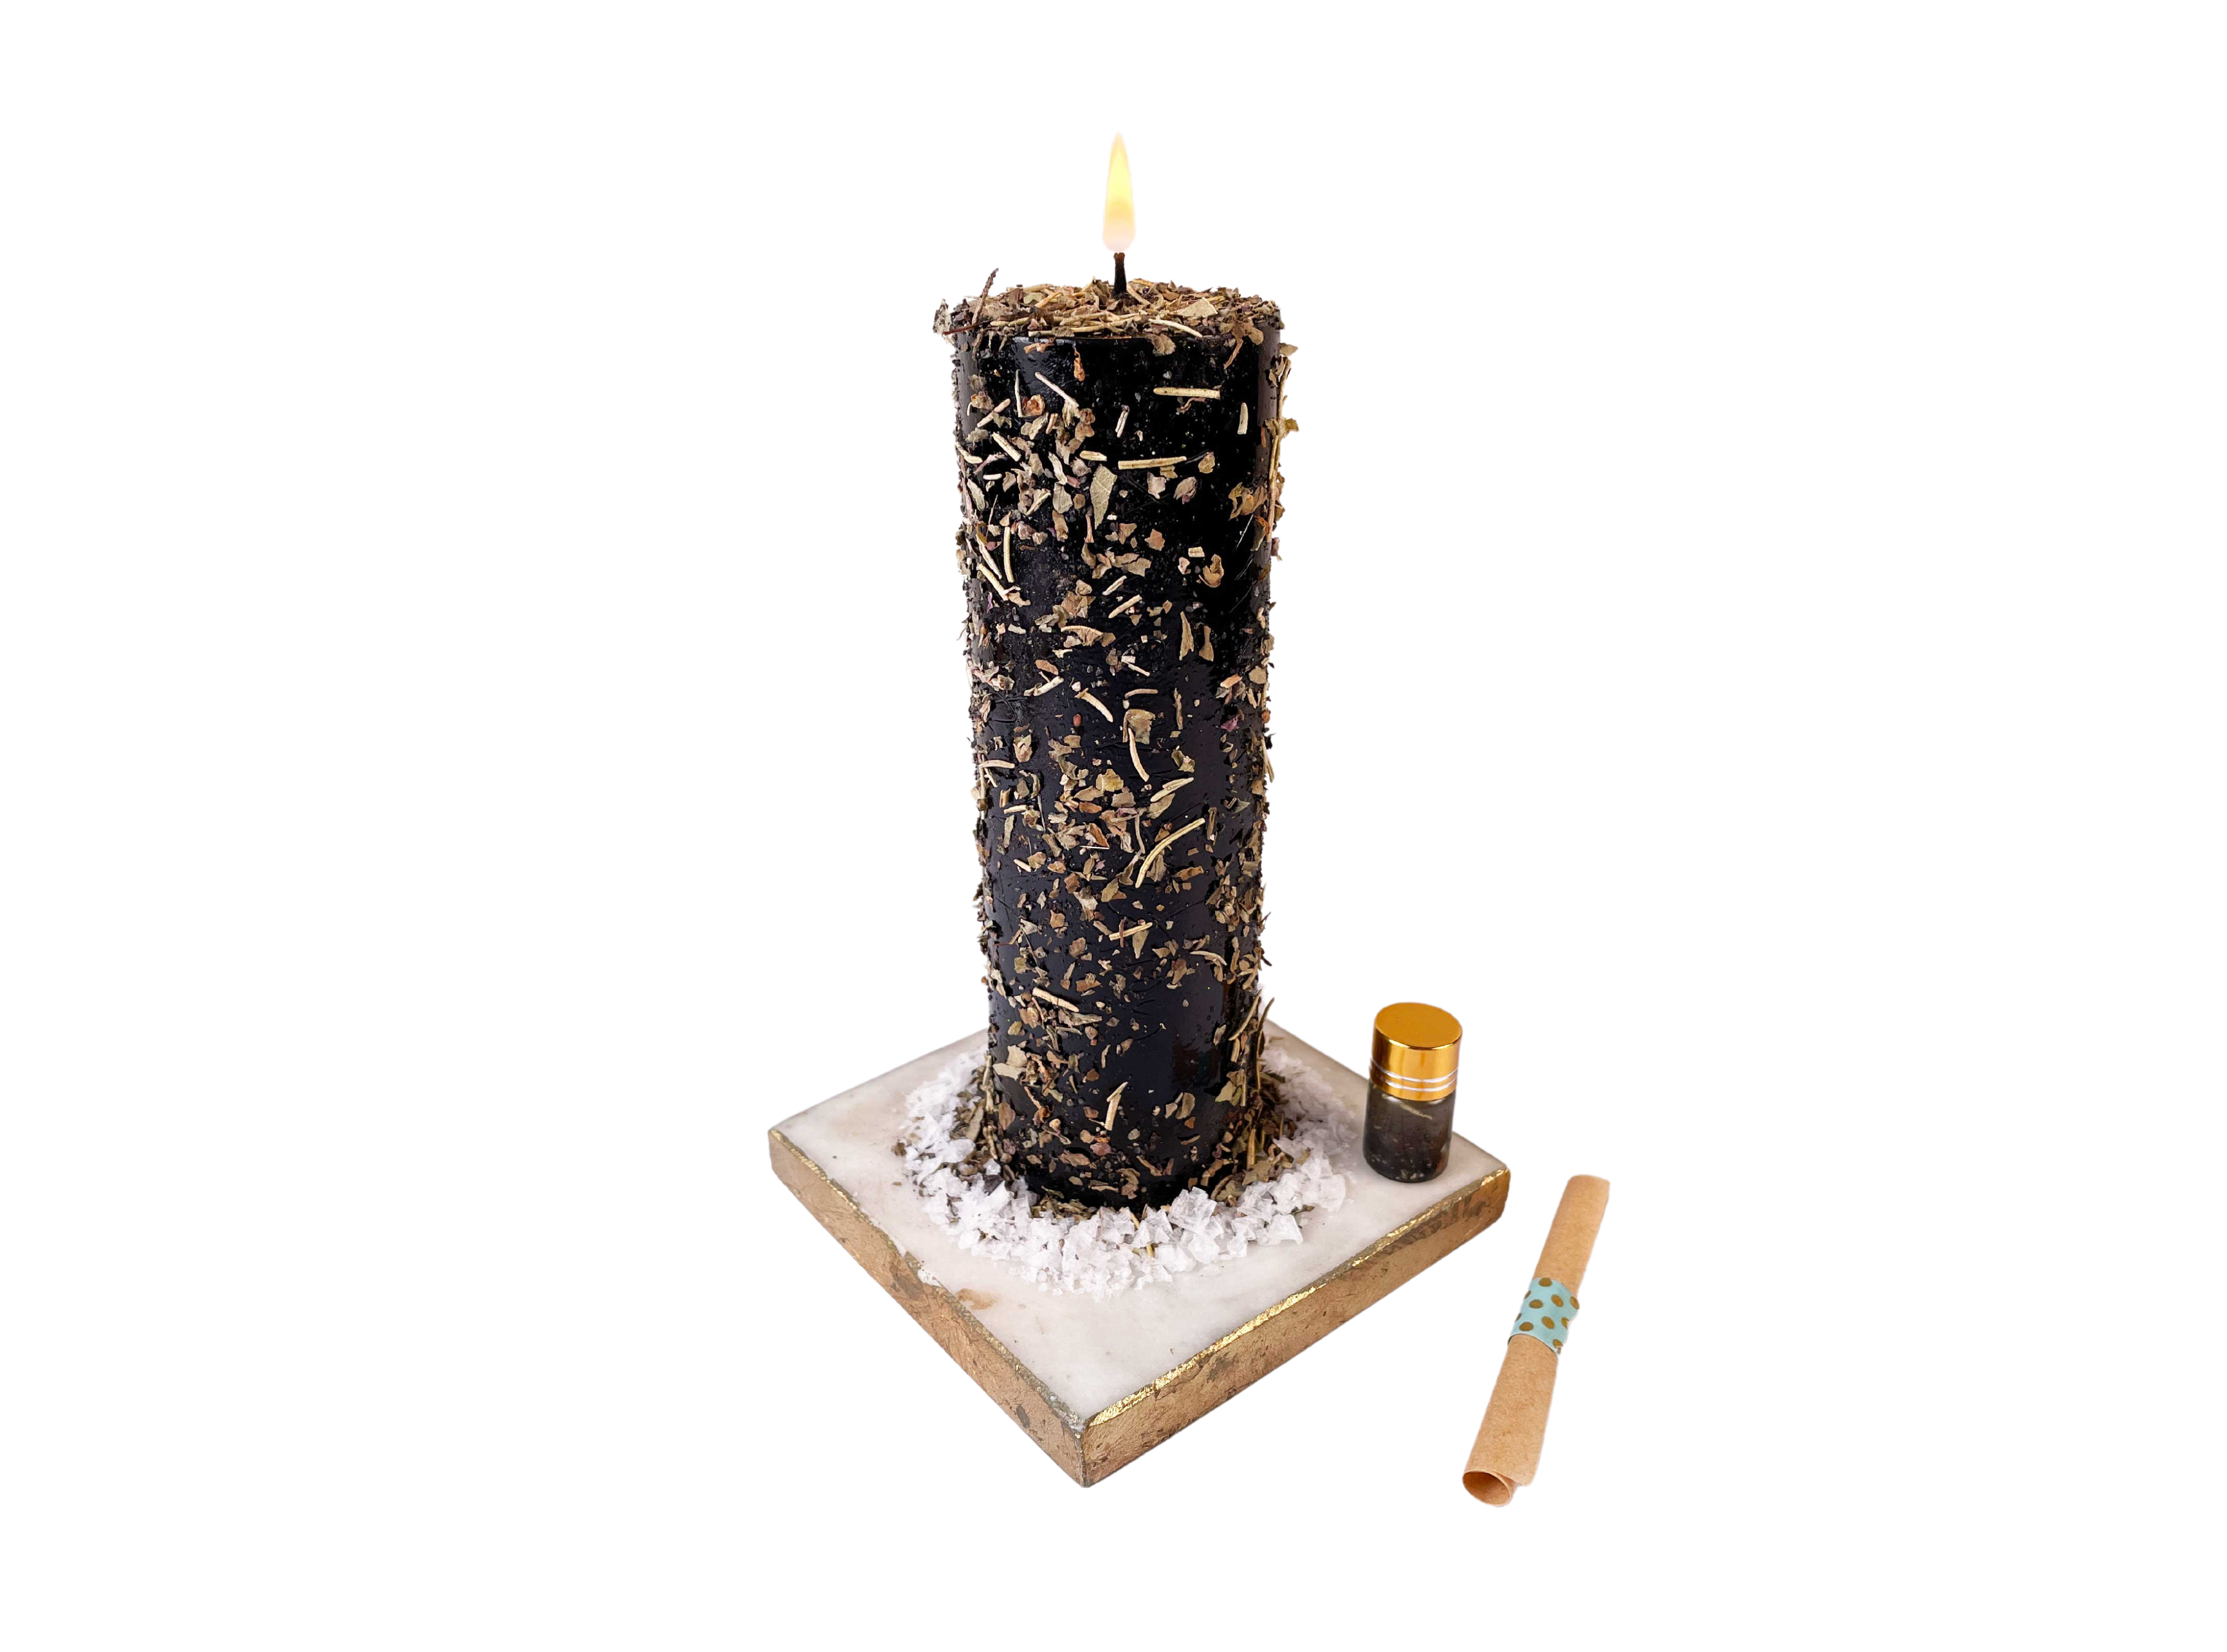 Buy Online Latest and Unique Grounding, Protection, Purifying Candle Ritual Kit | Shop Best Spiritual Items - The Mystical Ritual